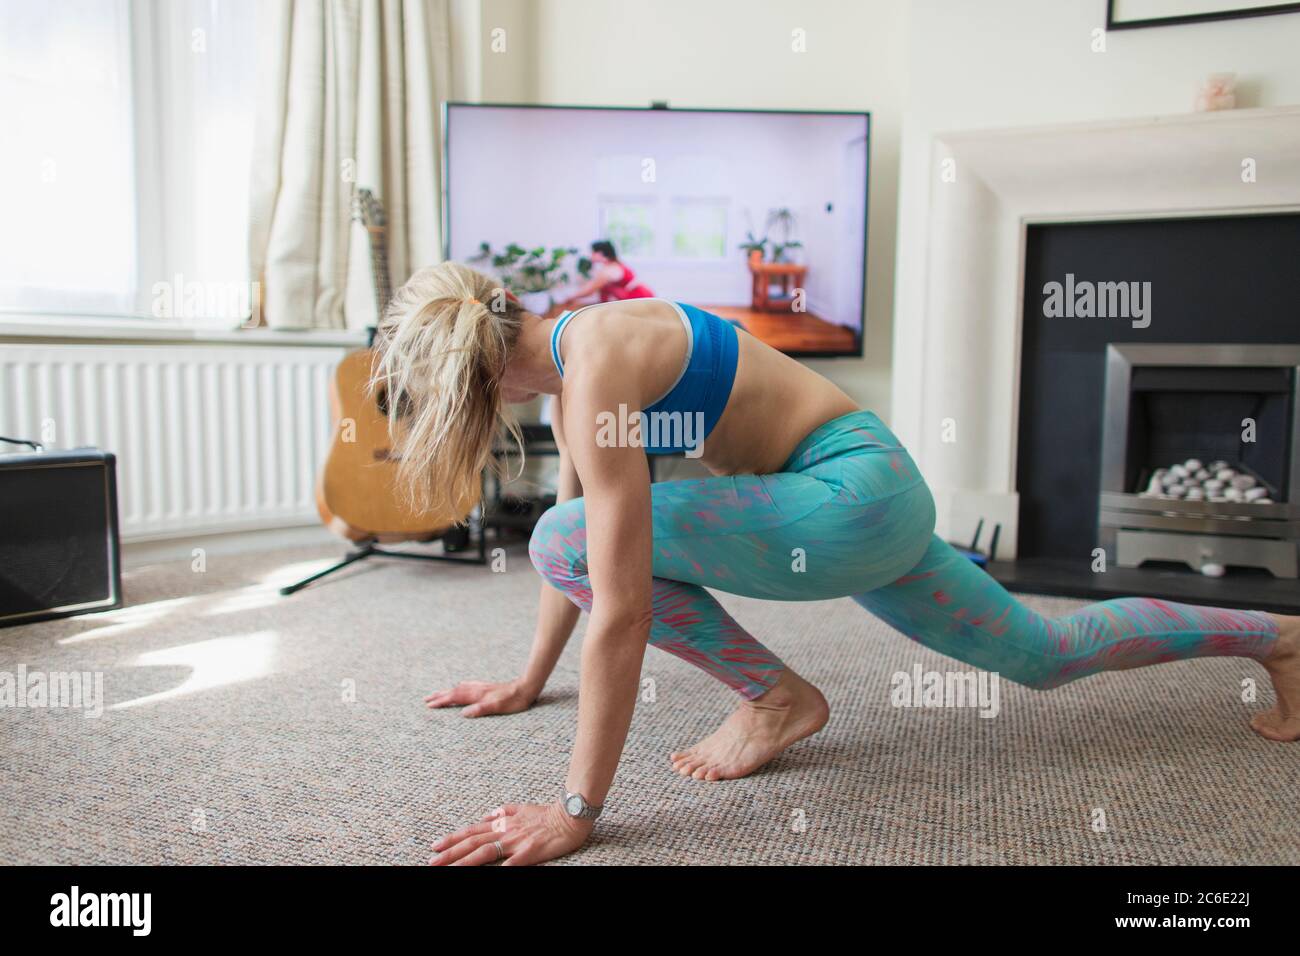 Woman practicing online yoga in living room Stock Photo